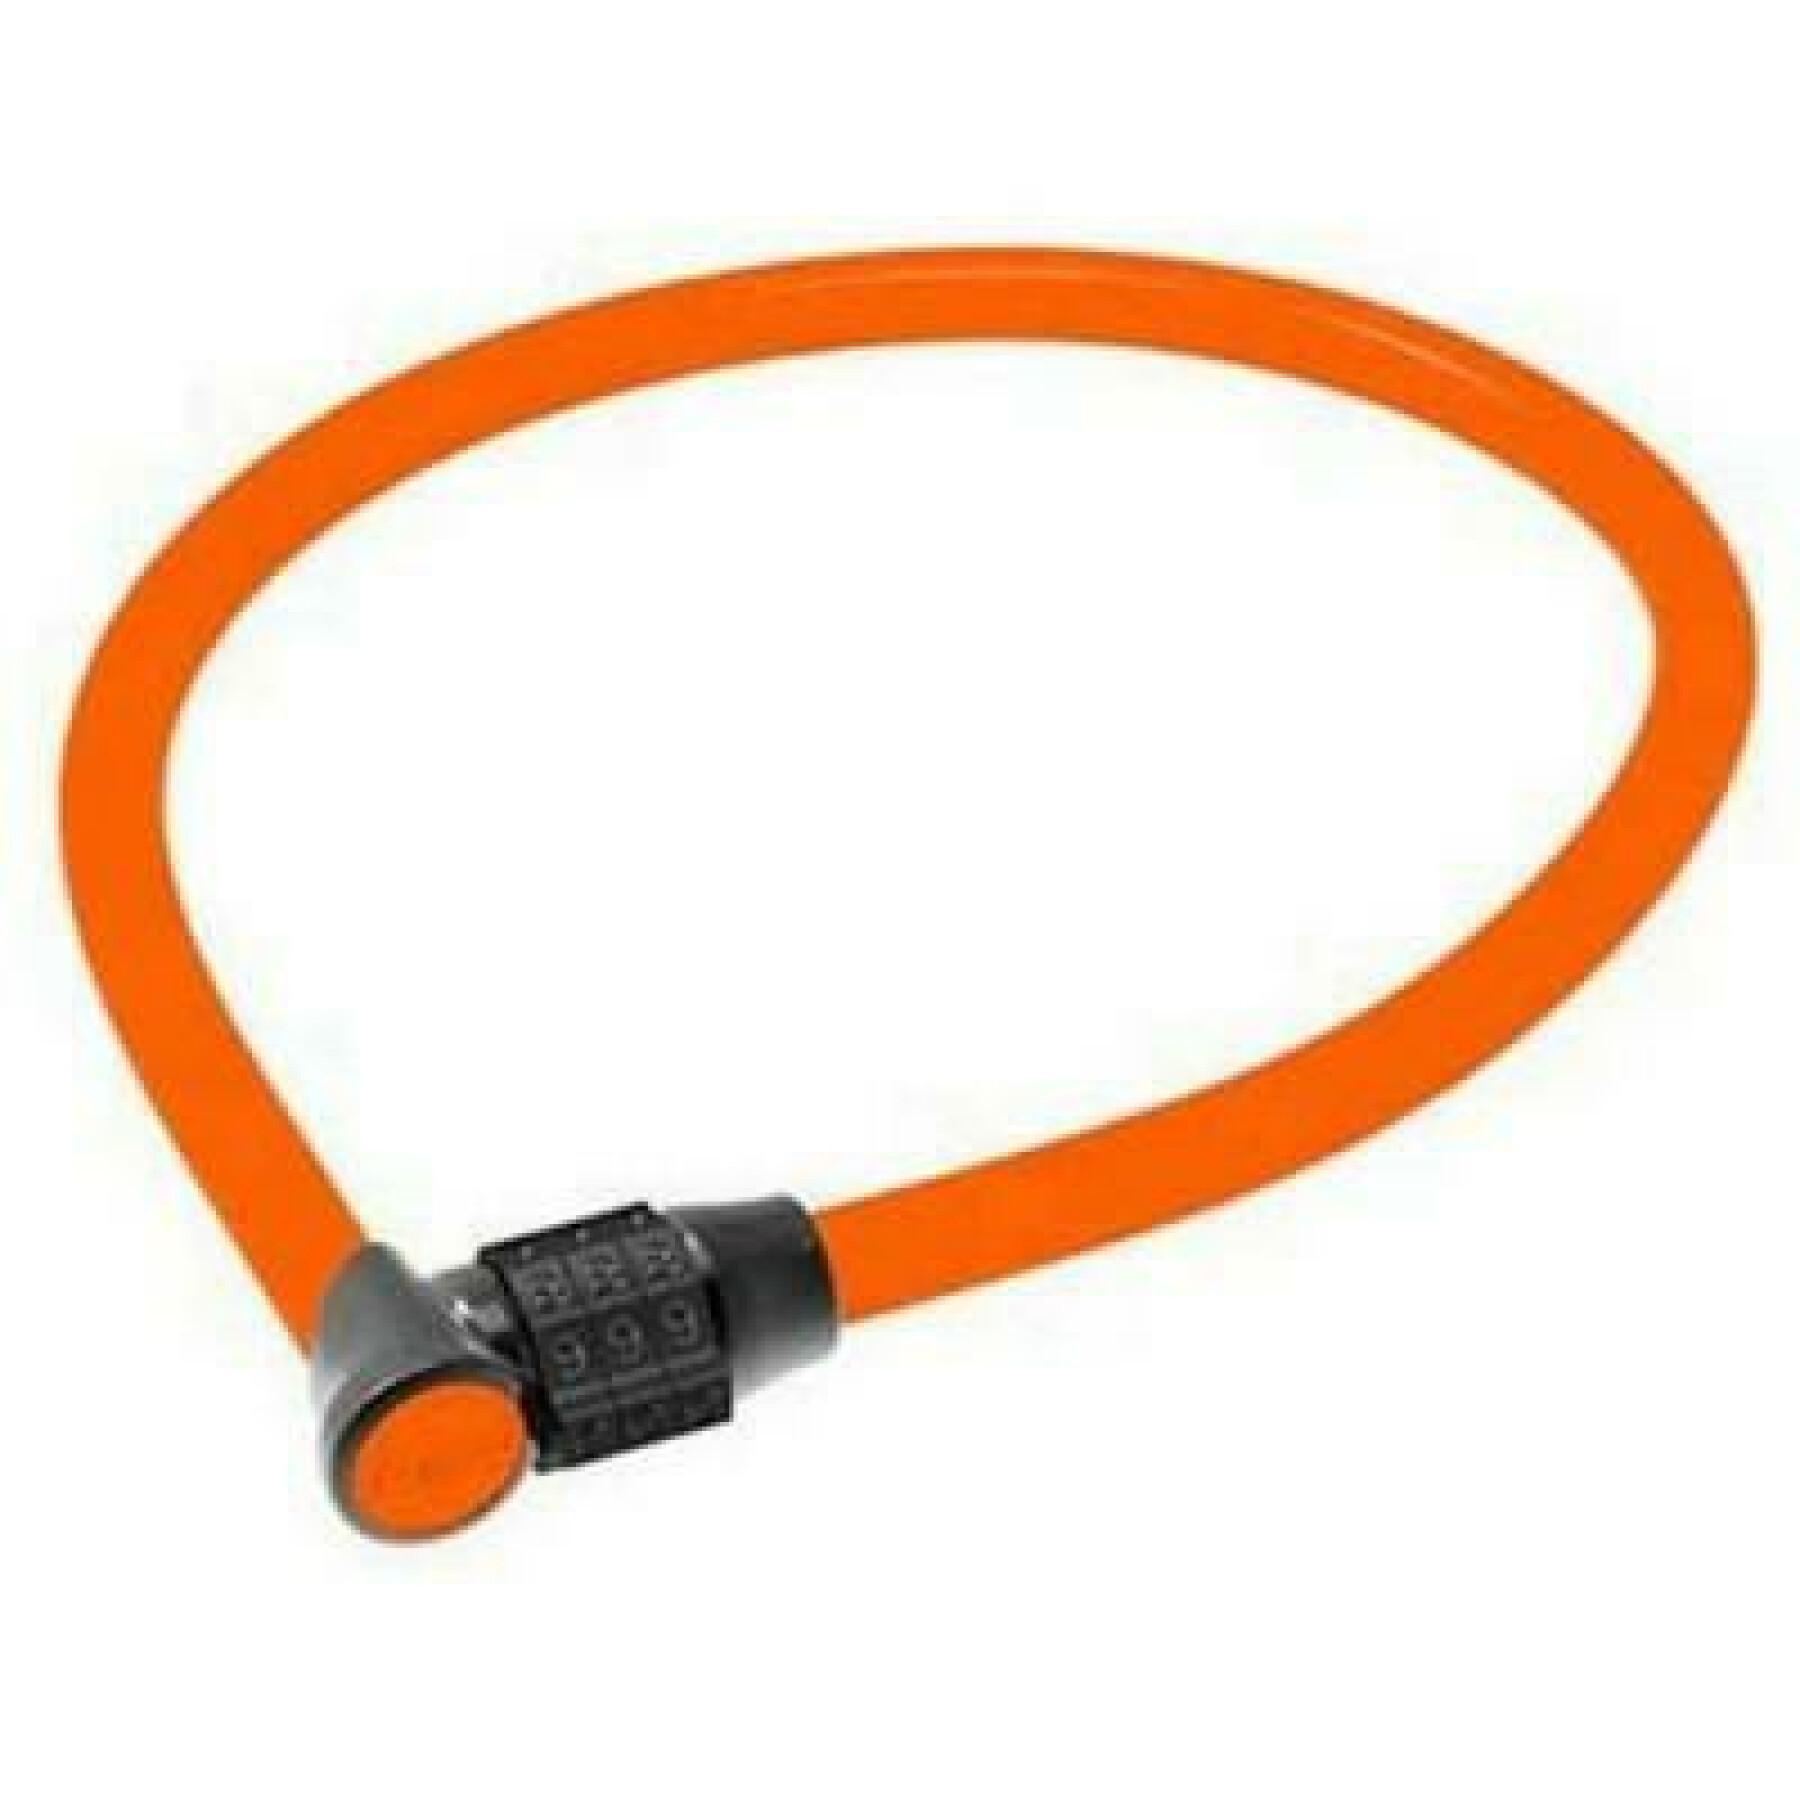 Cable lock Onguard Neon Light Combo 120 Cm X 8 Mm